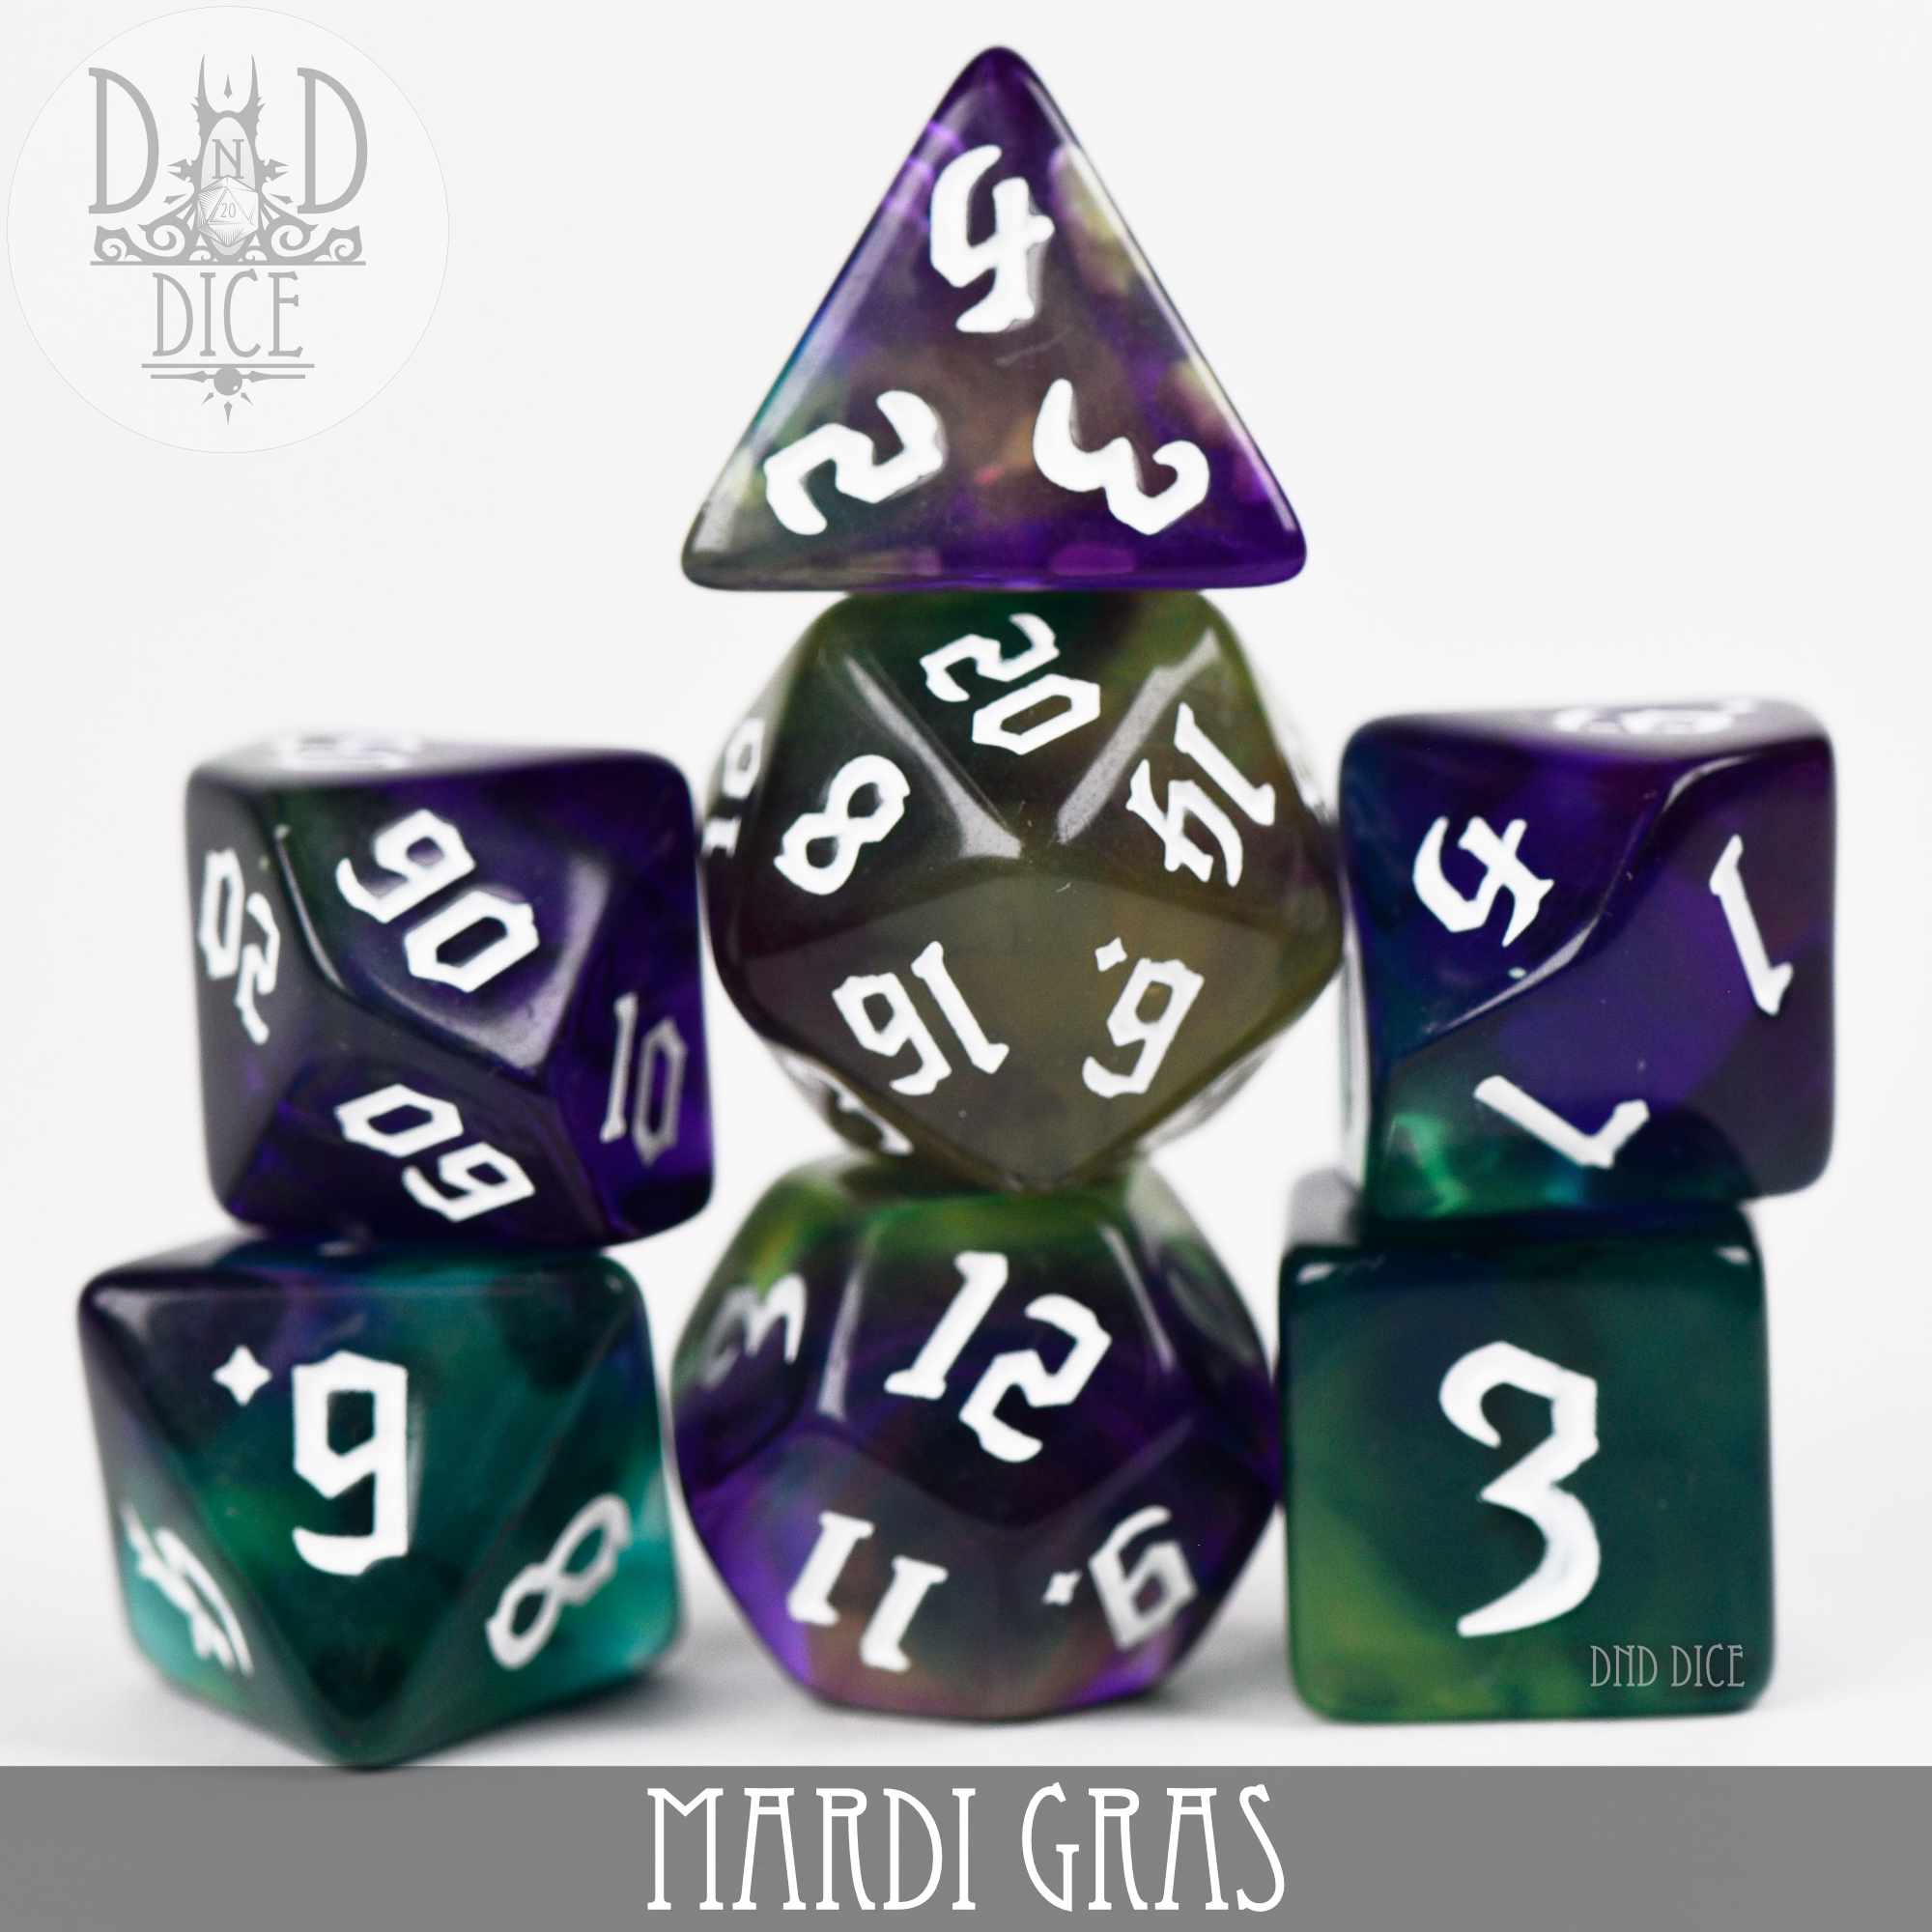 Clearance – D & D Outfitters